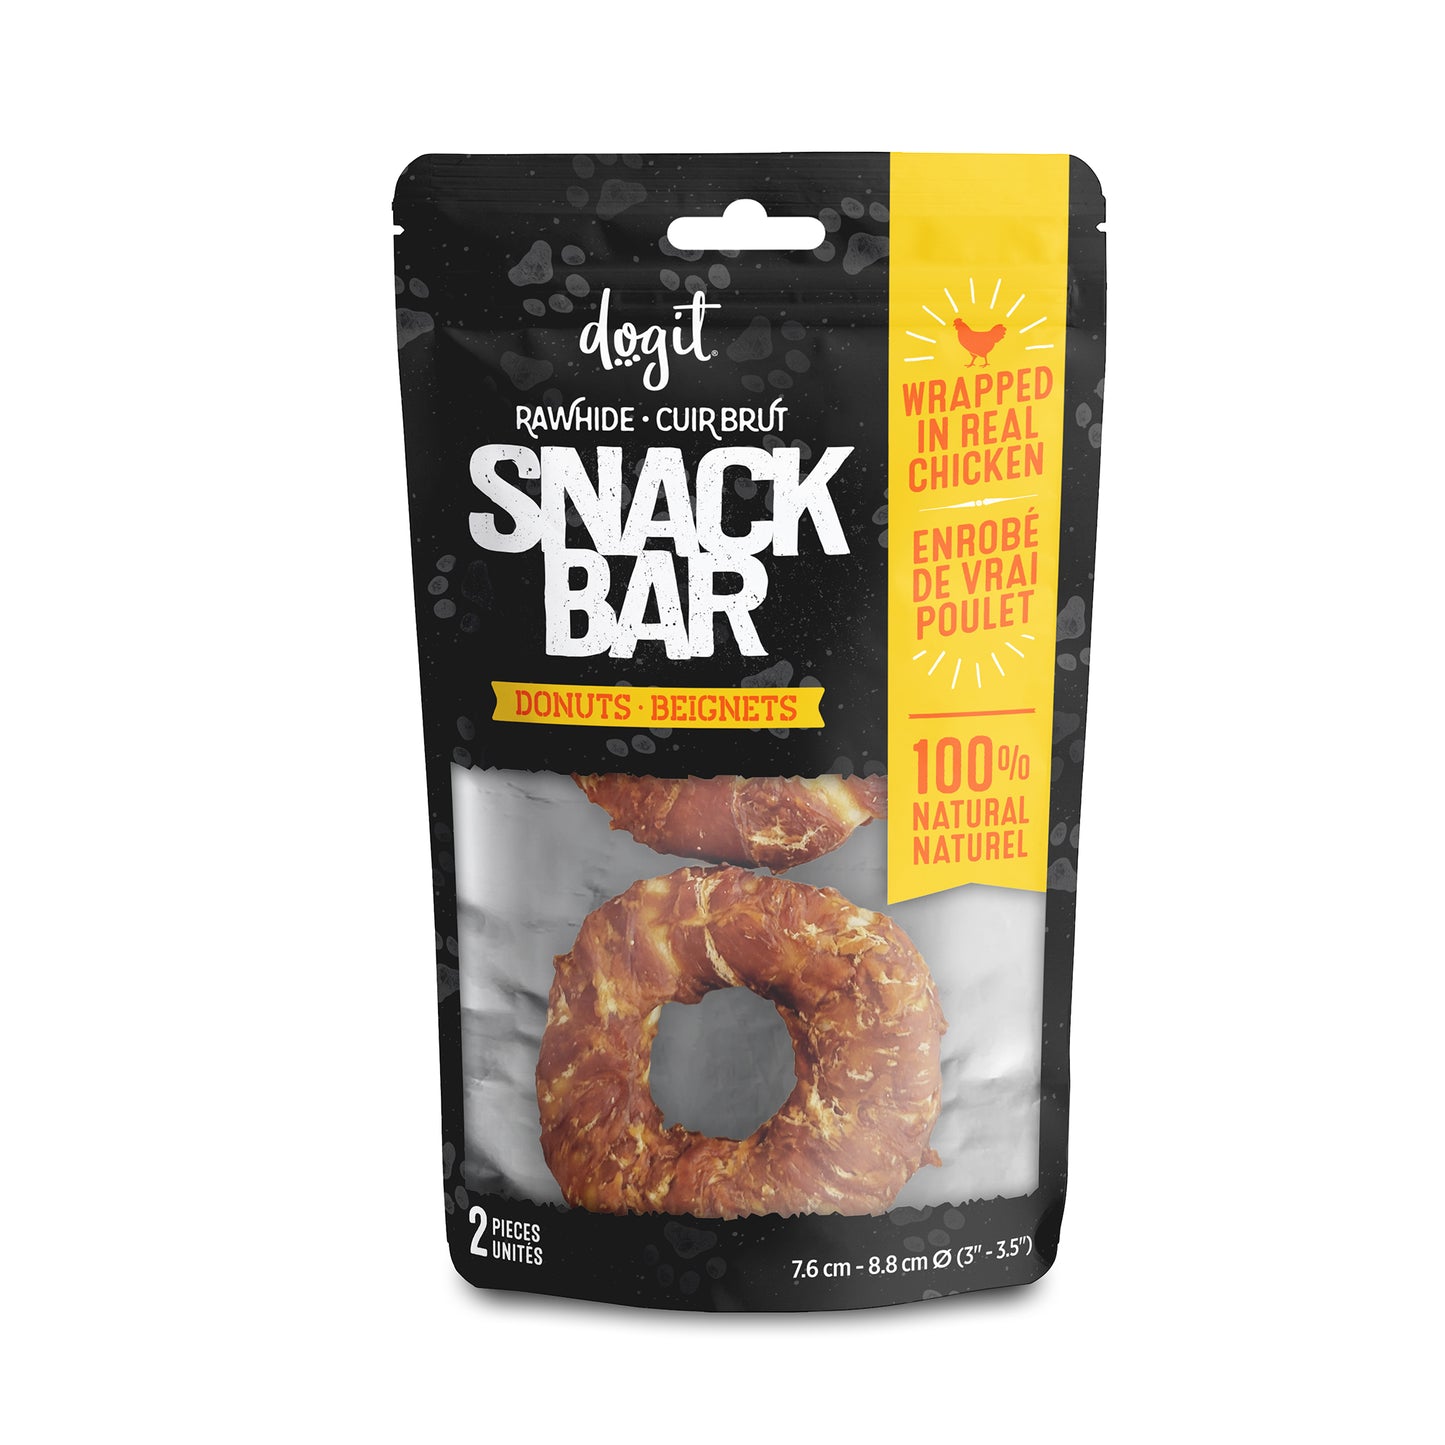 Dogit Snack Bar Dog Treats Chicken Rawhide Donut Small: 8cm / 2 Pack Dog Treats Small: 8cm | PetMax Canada